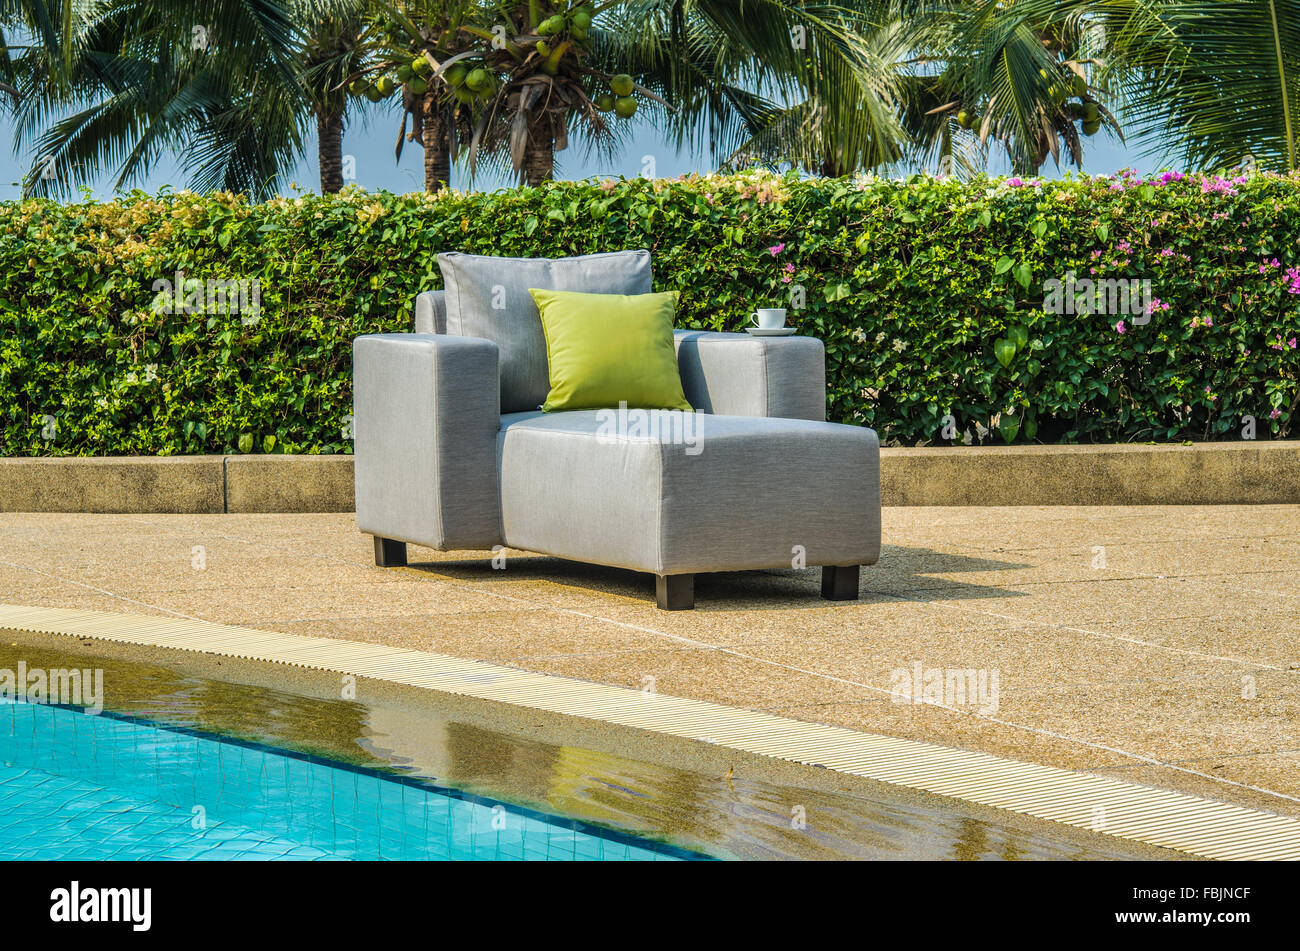 Outdoor indoor lounger chair from water resistant fabrics Stock Photo